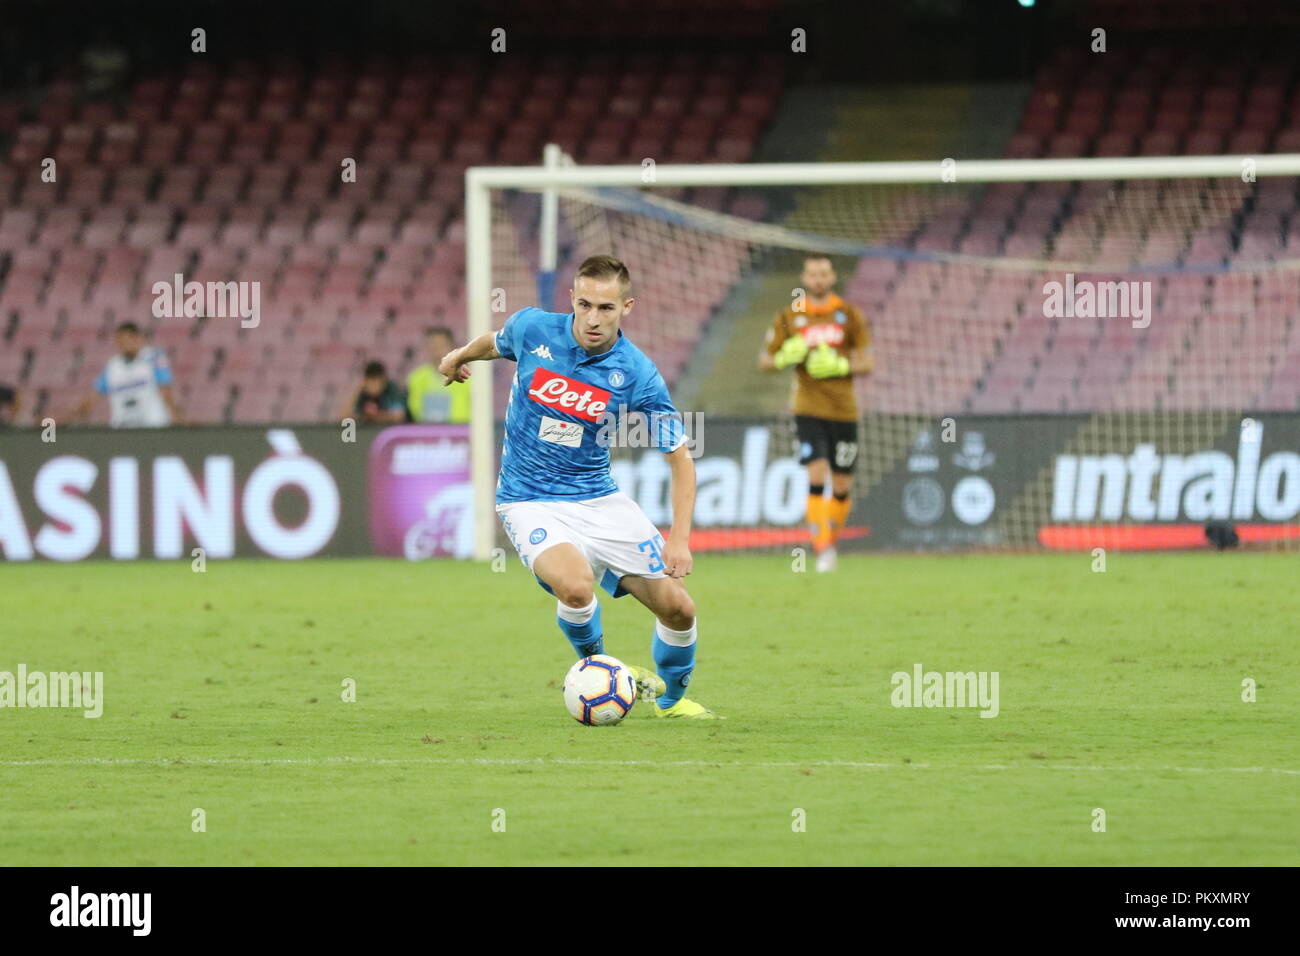 Naples, Italy. 15th September 2018. In the picture the Napoli Rog player wins a nice contrast against the Florentine player Benassi.Stadium San Paolo Naples. 15th Sep, 2018. 09/15/2018 - Italy.final result SSC Napoli 1 AC Fiorentina 0. Credit: Fabio Sasso/ZUMA Wire/Alamy Live News Stock Photo